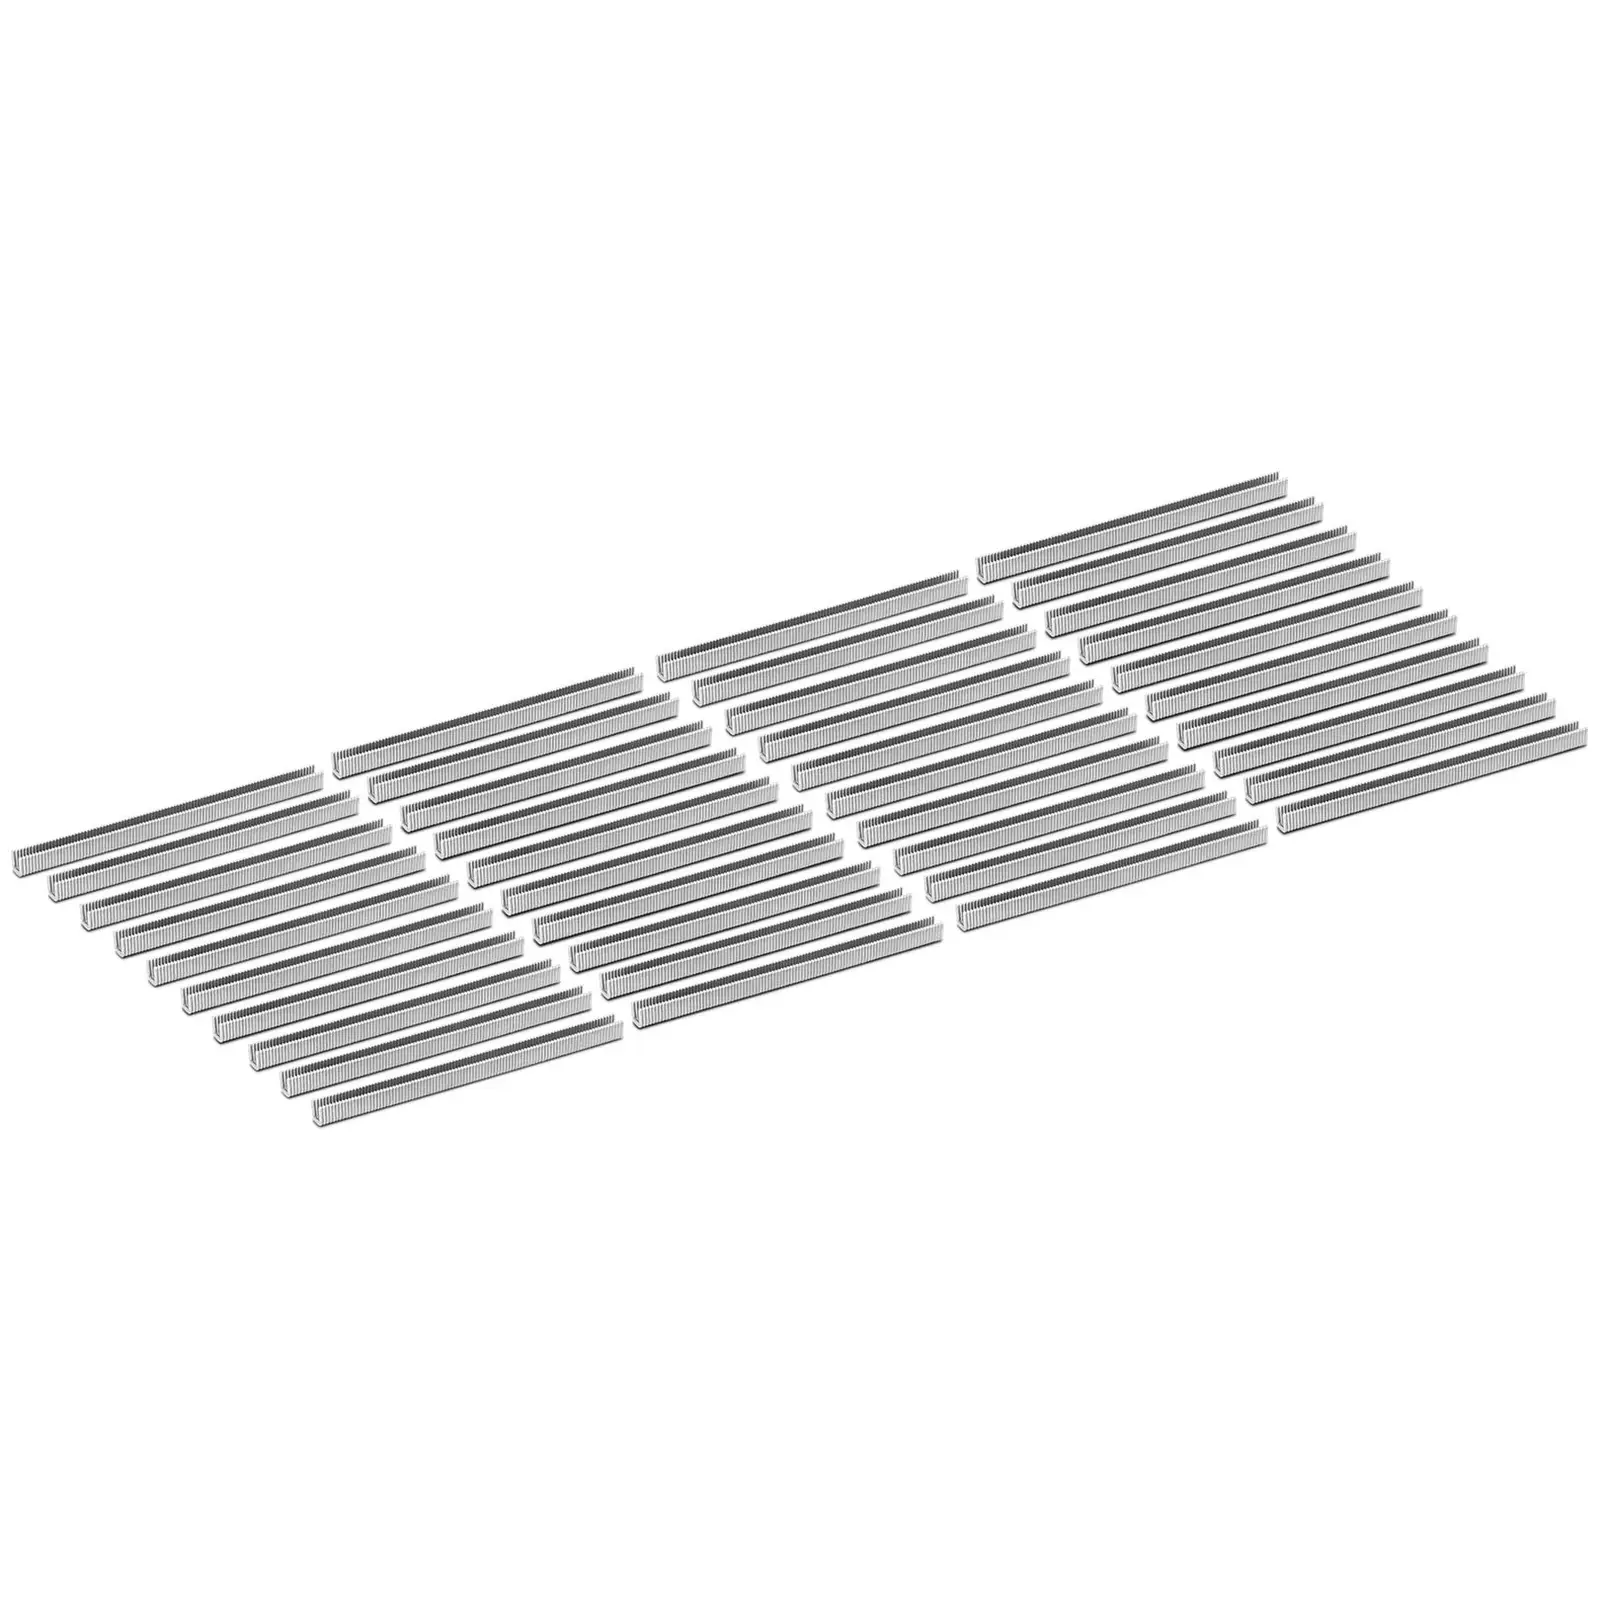 Clips for sausage clippers - 4000 pieces - 11.5 x 11.5 x 2 mm - royal_catering